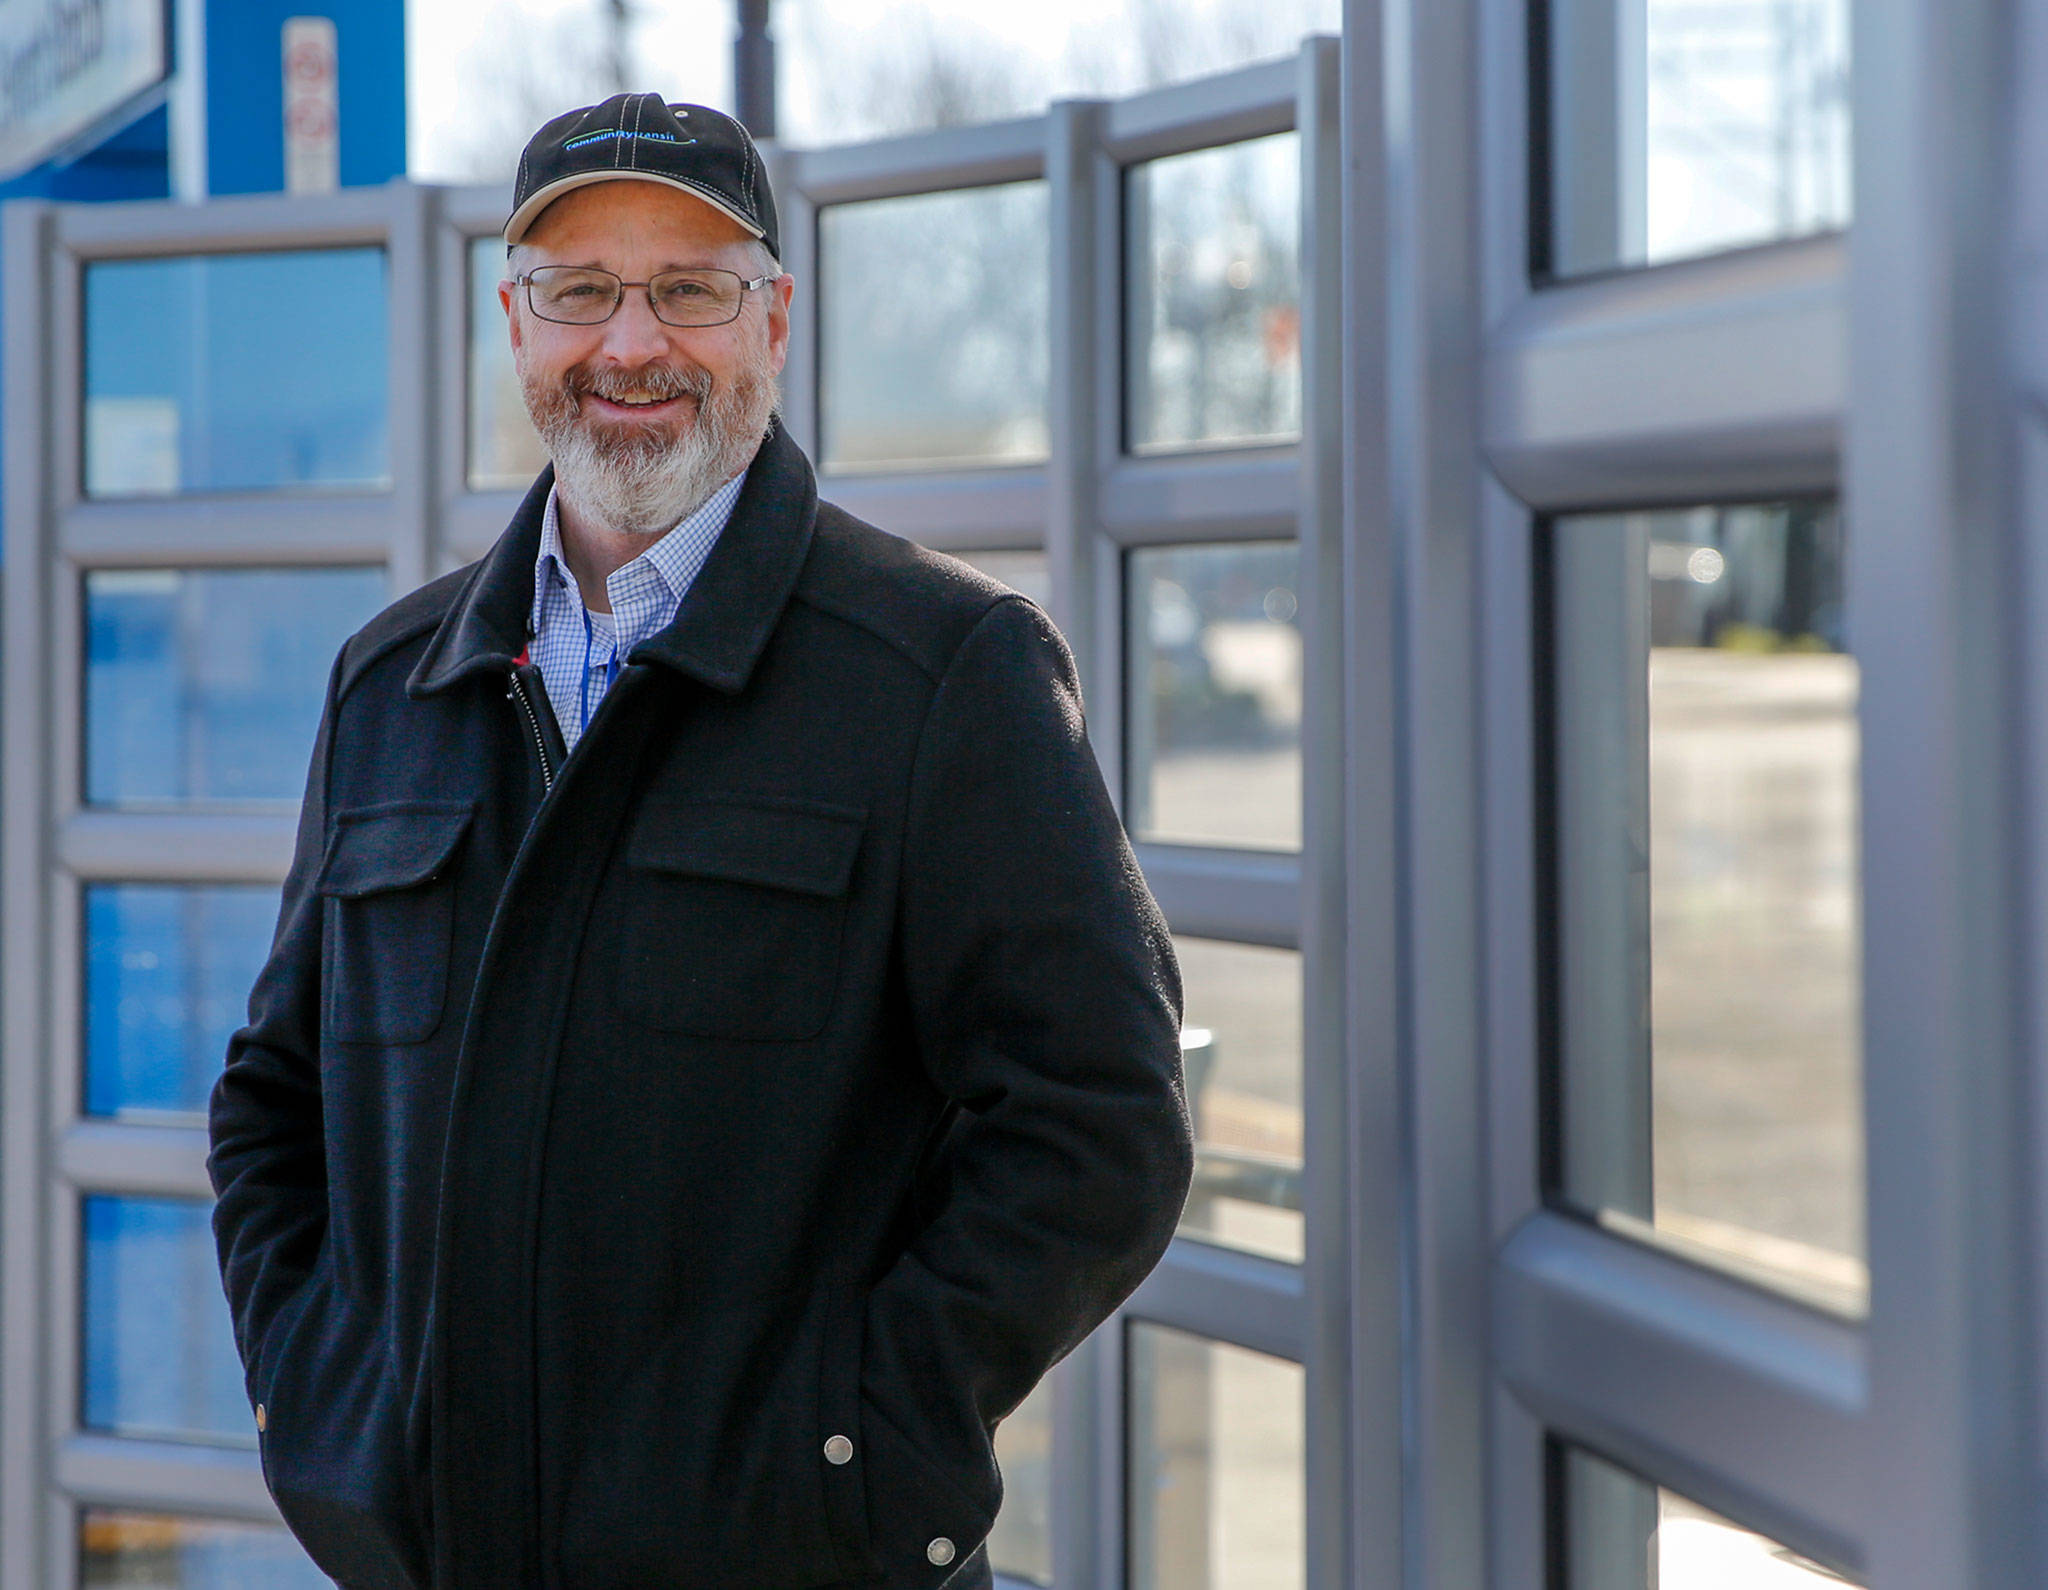 Ric Ilgenfritz is the new Community Transit CEO. (Kevin Clark / The Herald)